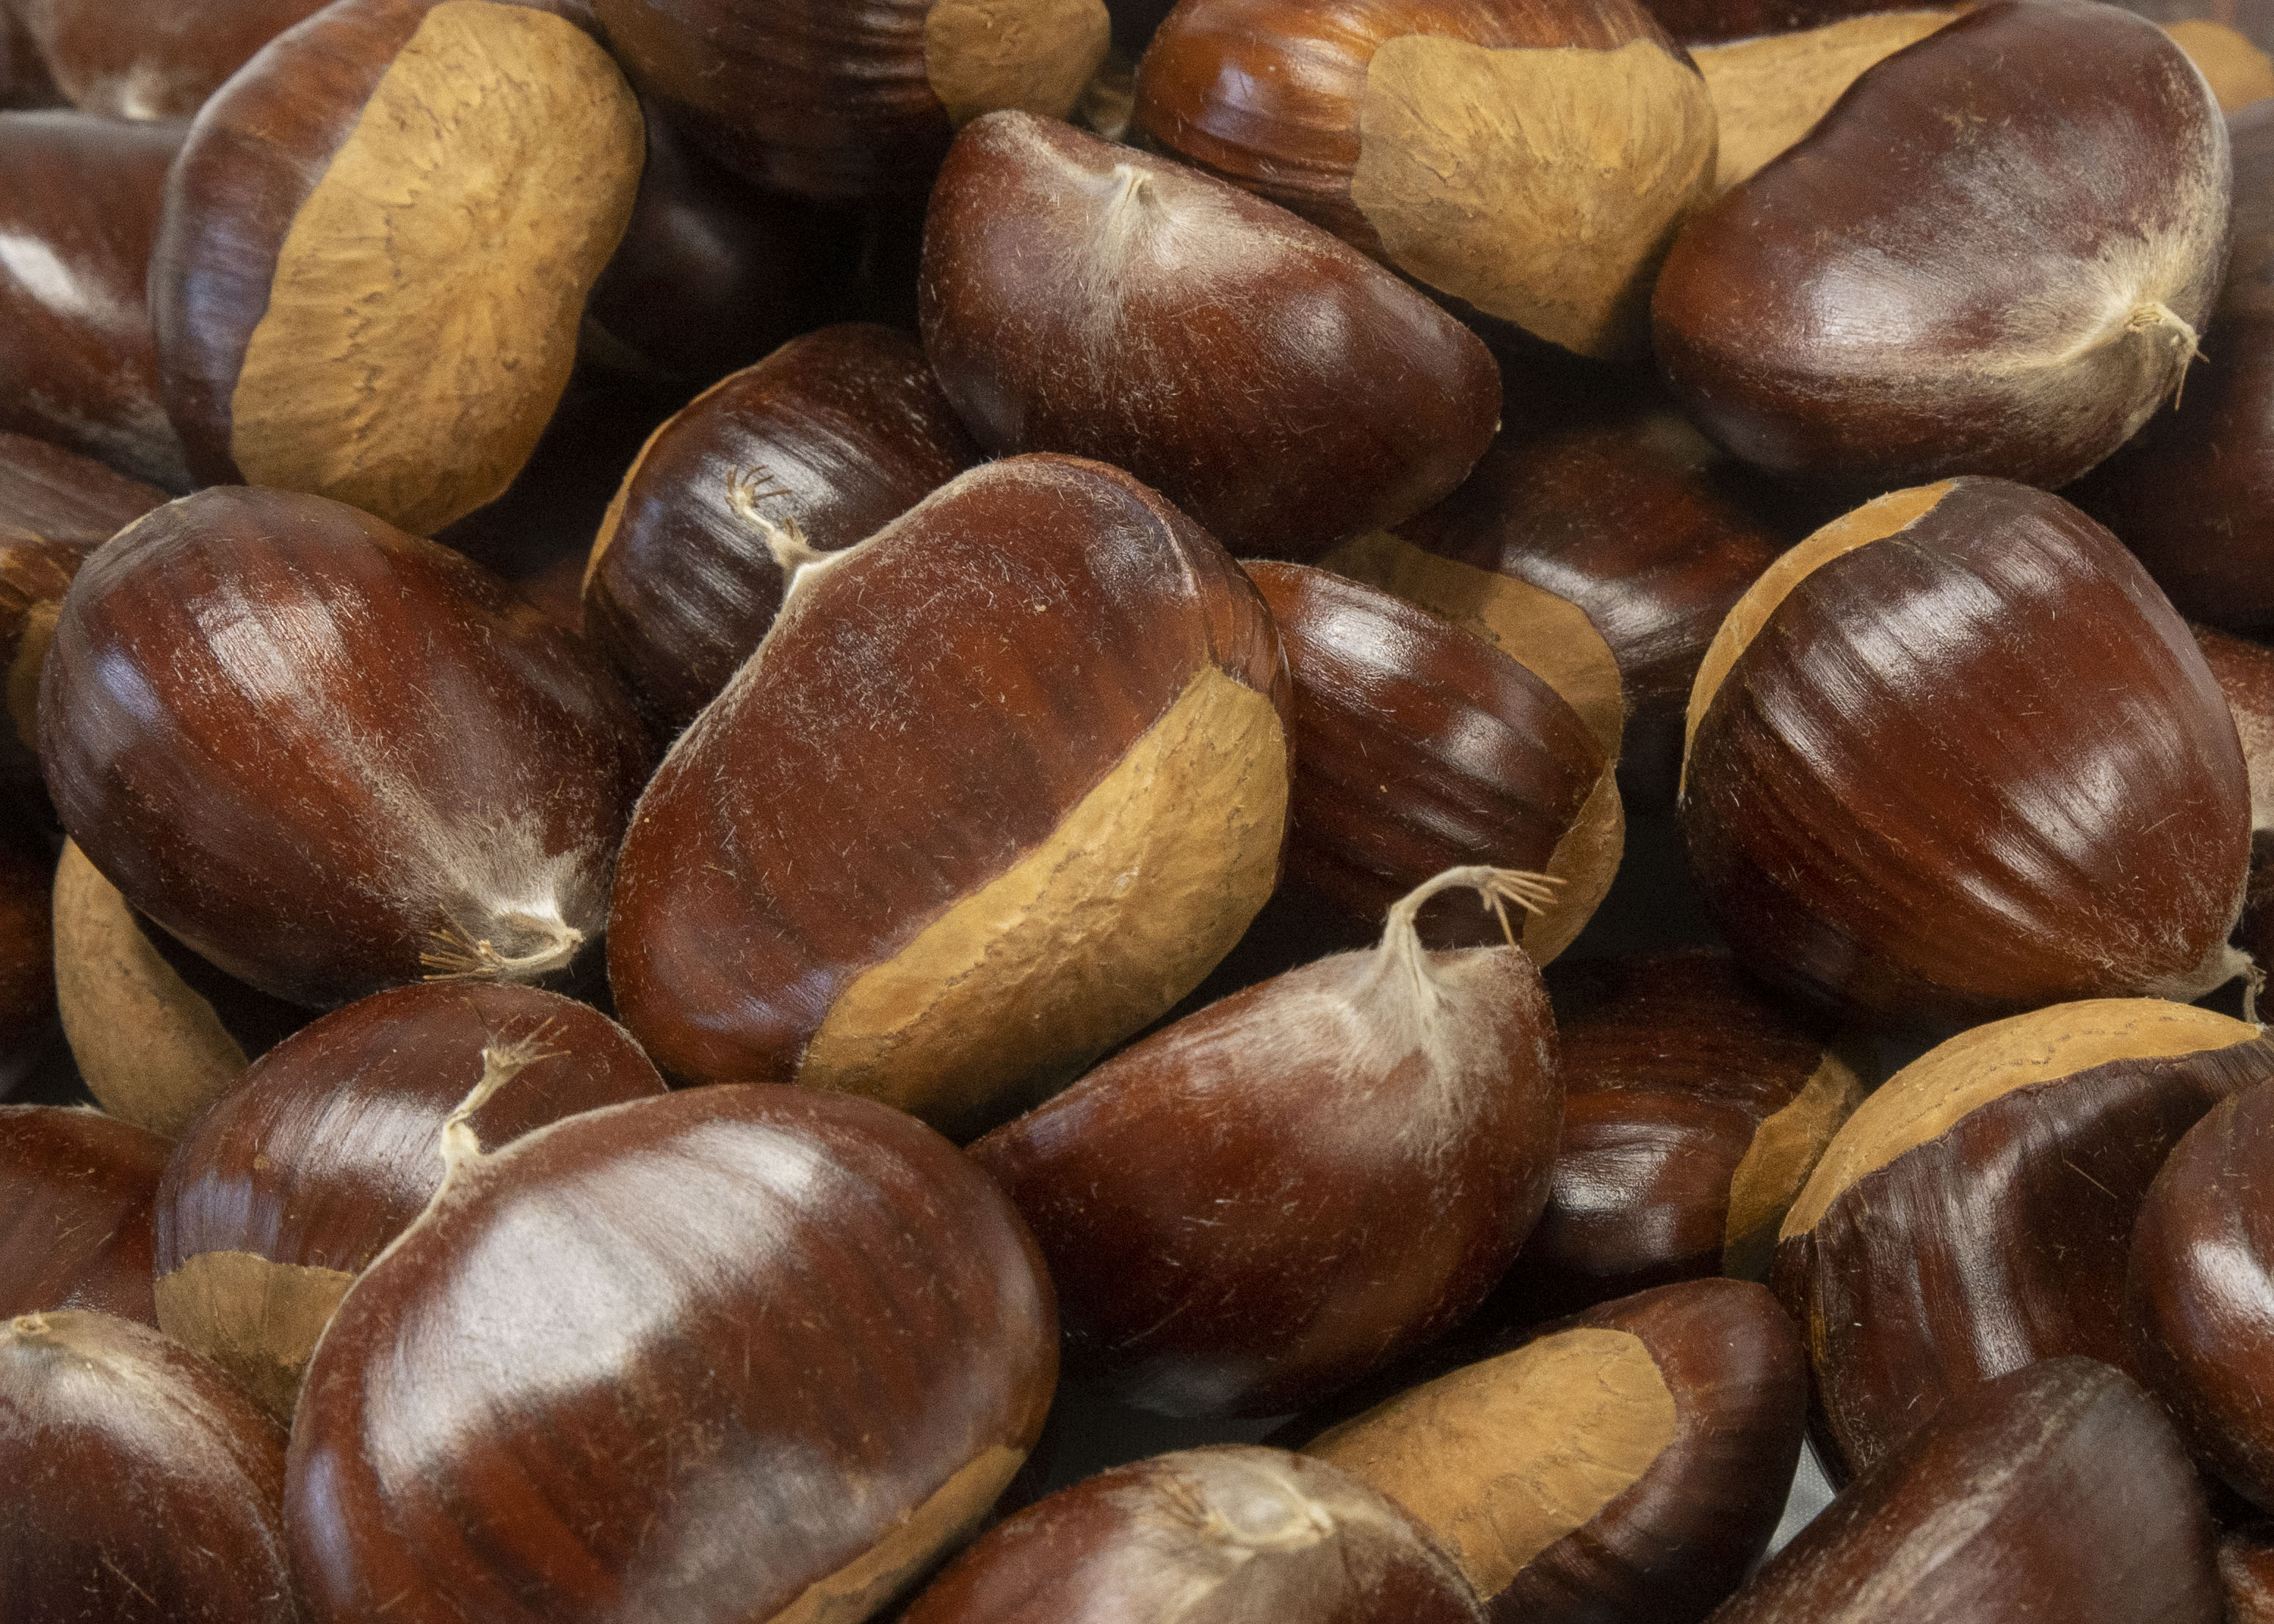 Chestnuts in perfect condition